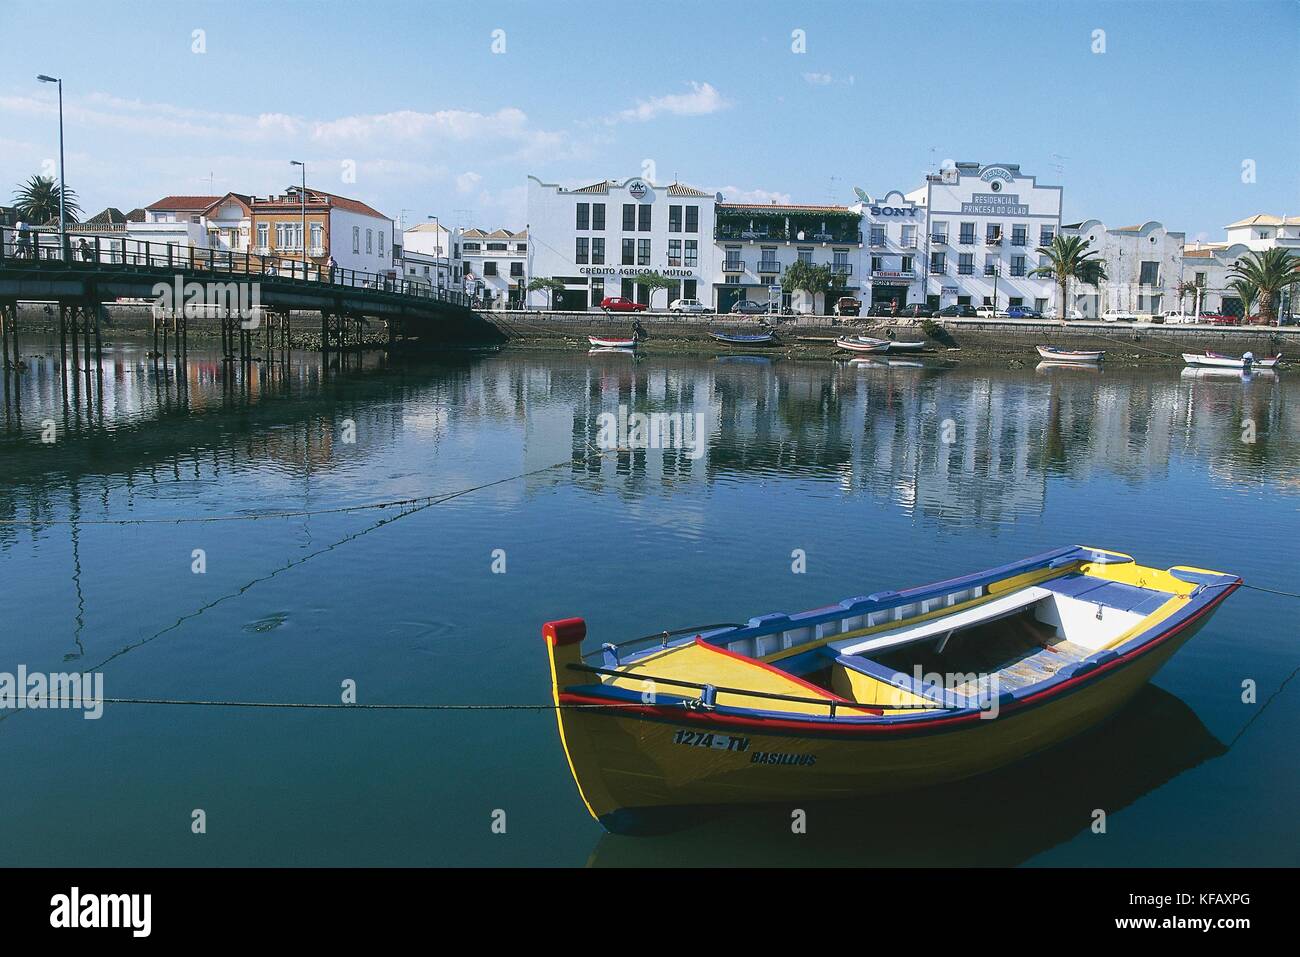 Portugal, Tavira, Houses along the mouth of the Rio Sequa. Fishing boat in the foreground Stock Photo